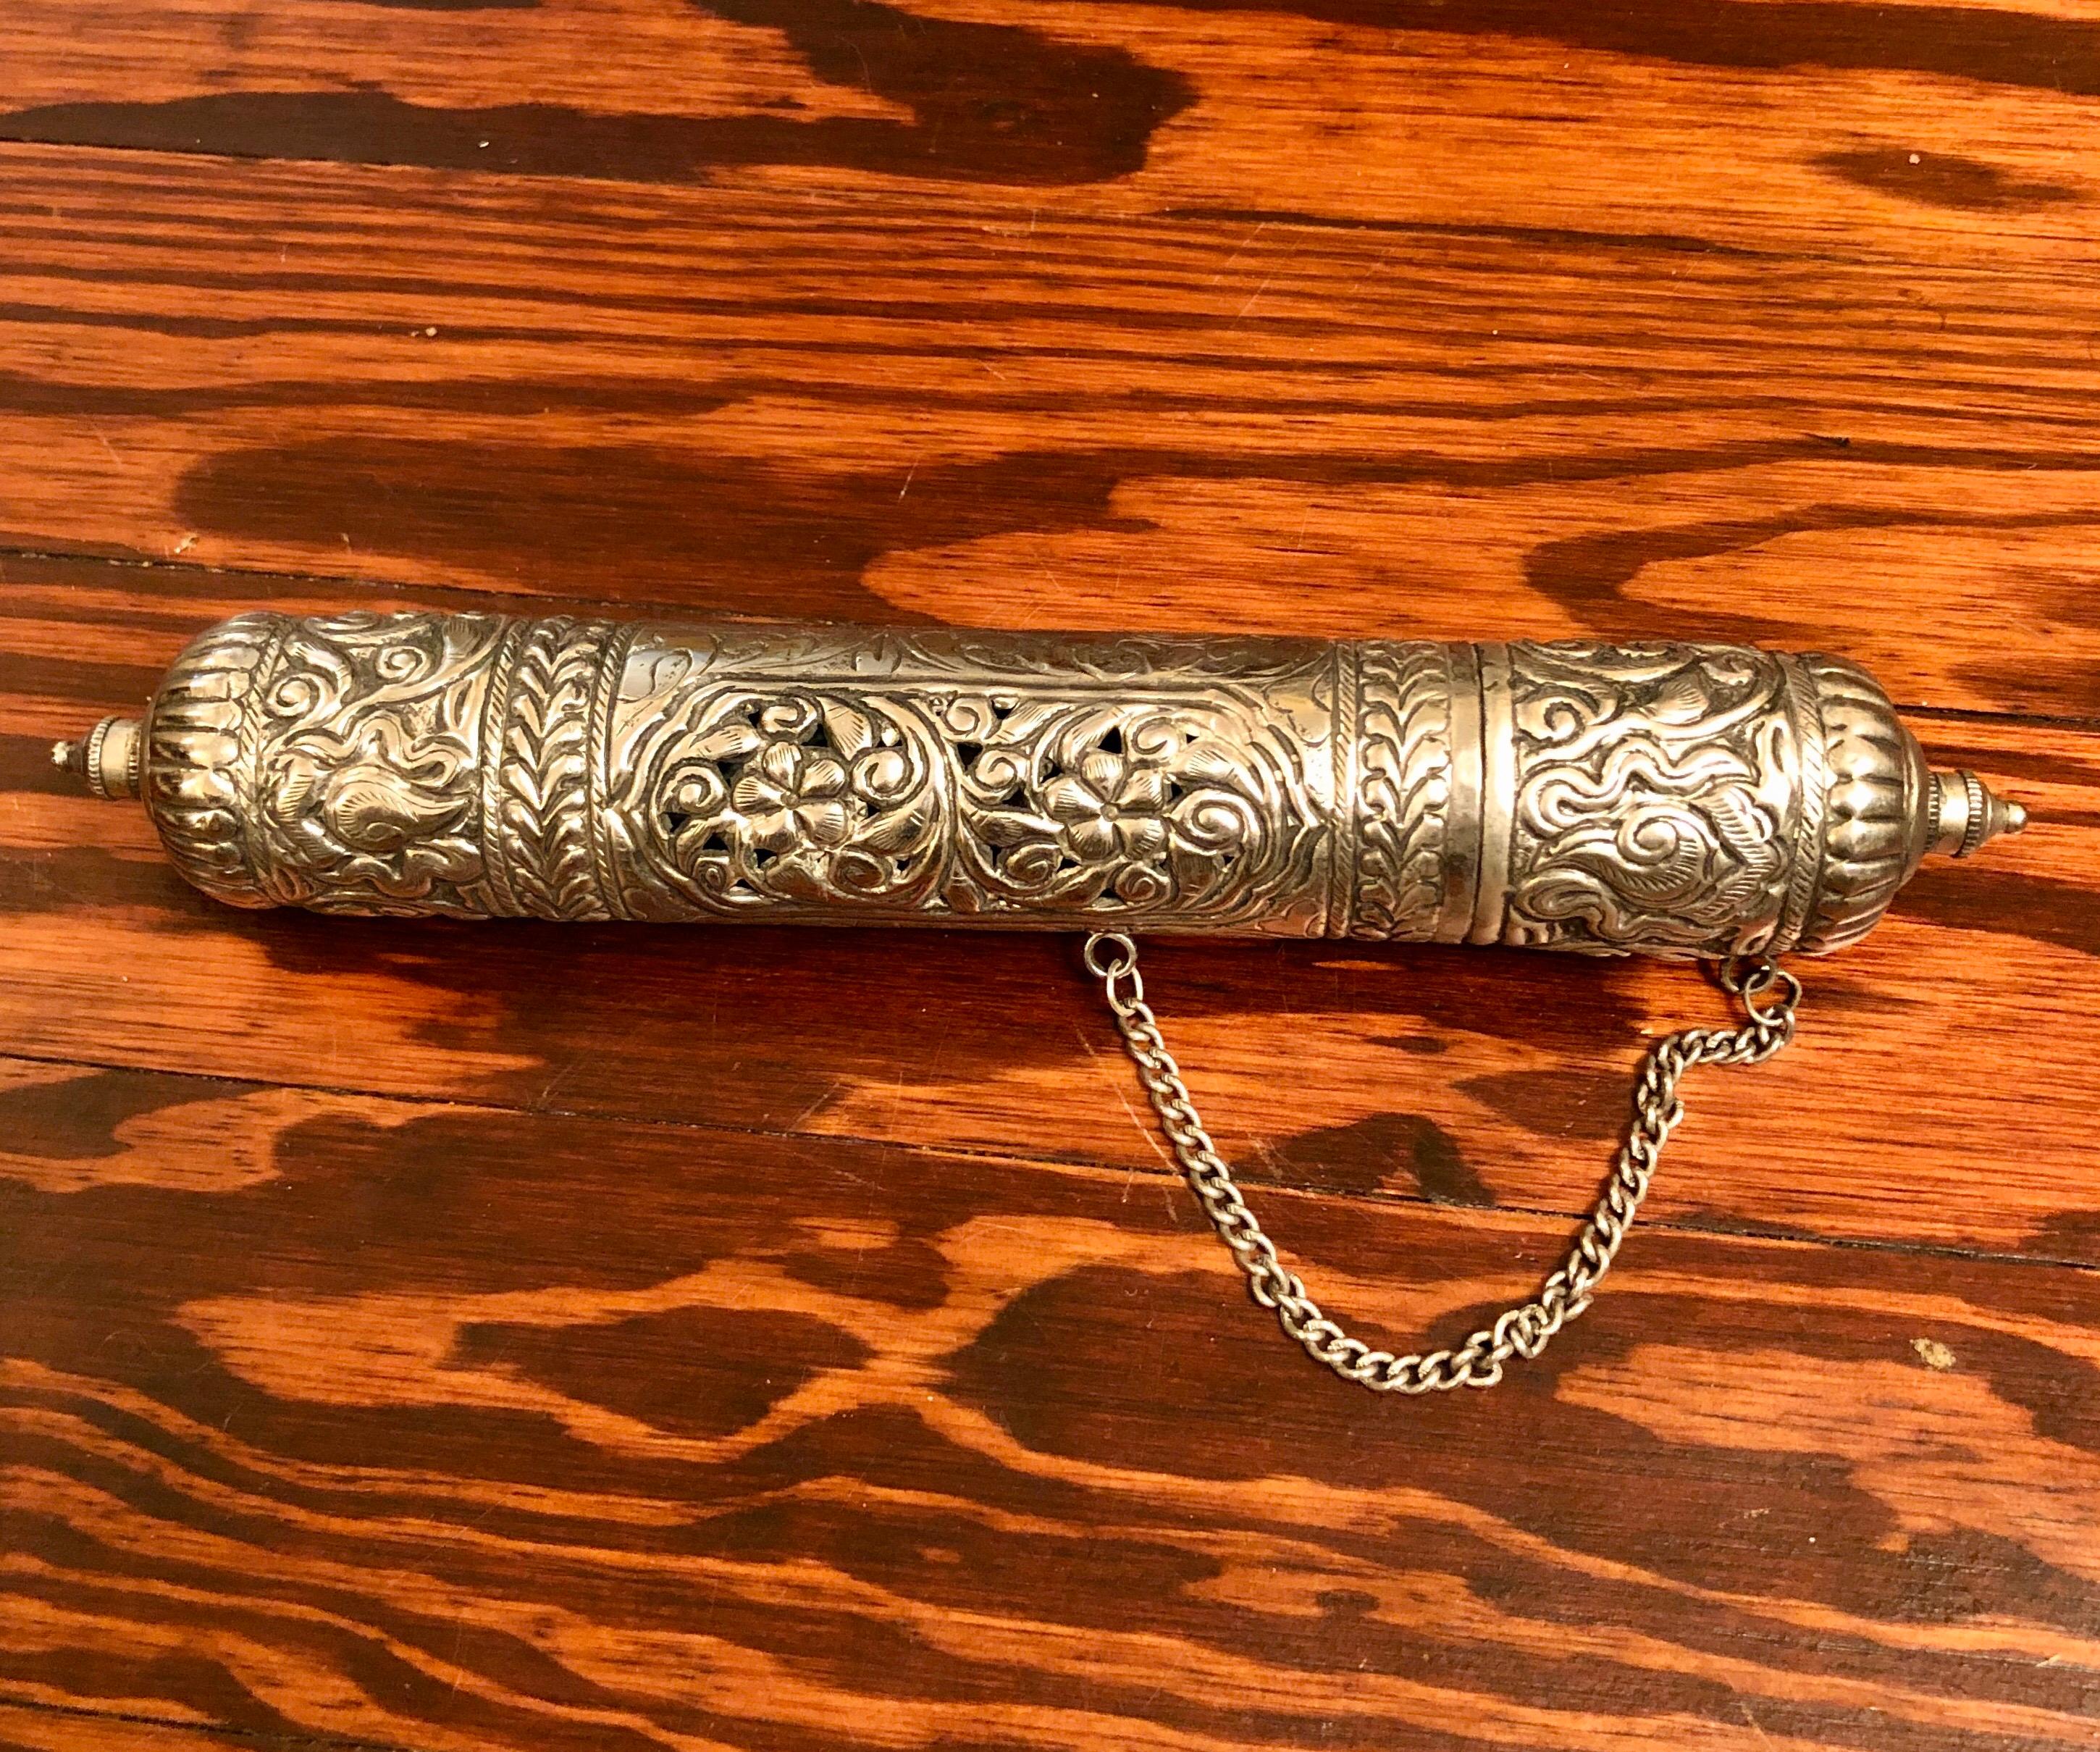 Mid-19th Century Ornate Silver Scroll Holder, Moroccan Jewish Judaica Antique For Sale 3